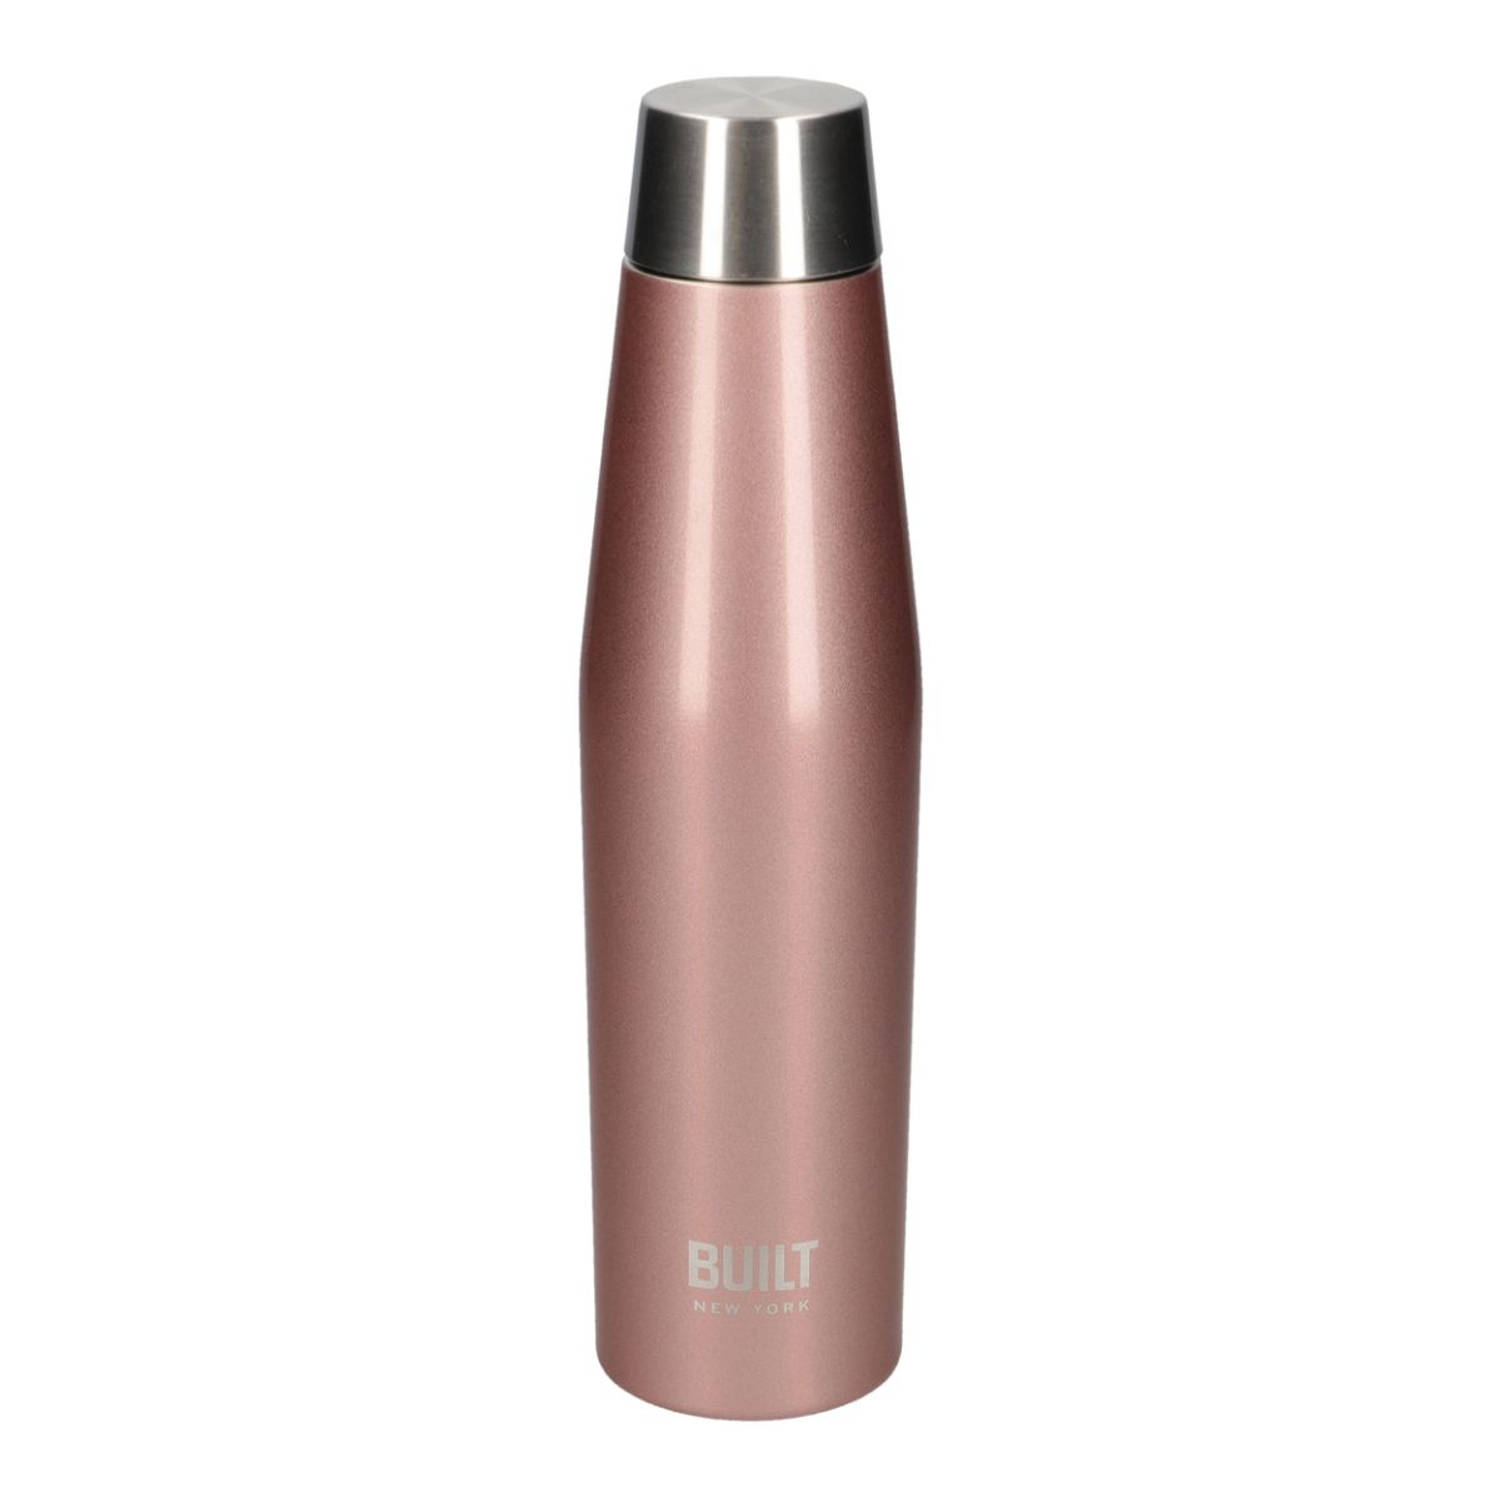 Dubbelwandige Thermosfles, 0.54 Liter, Rose/gold - Built New York Perfect Seal